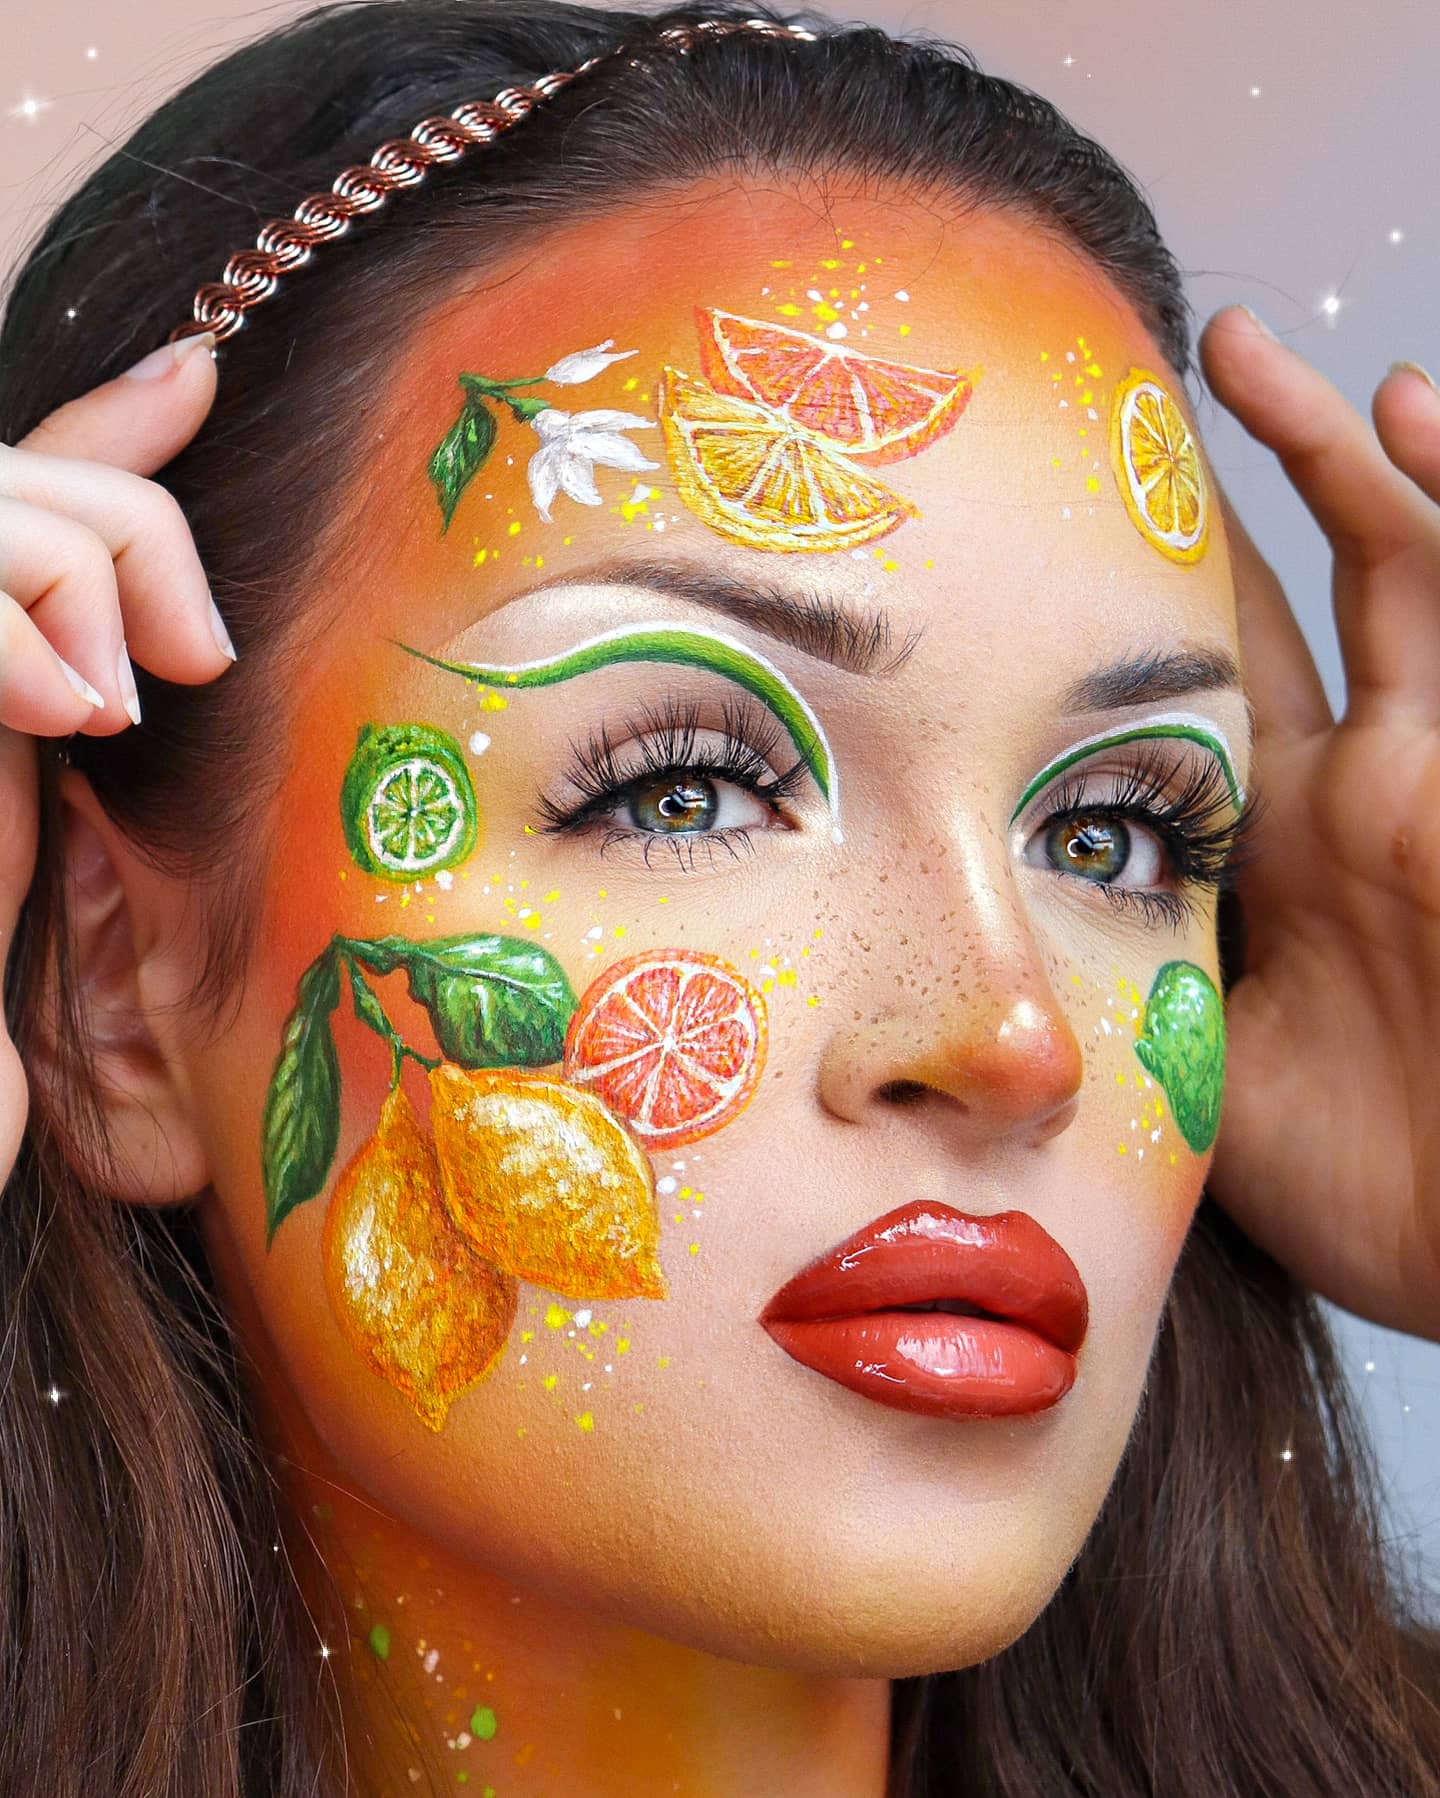 anklageren behagelig stakåndet Lena ✨🎃 on X: "🍋🍊🌱 fruit makeup! why is there no lime emoji tho🥲  https://t.co/dAd3eQHRgI" / X